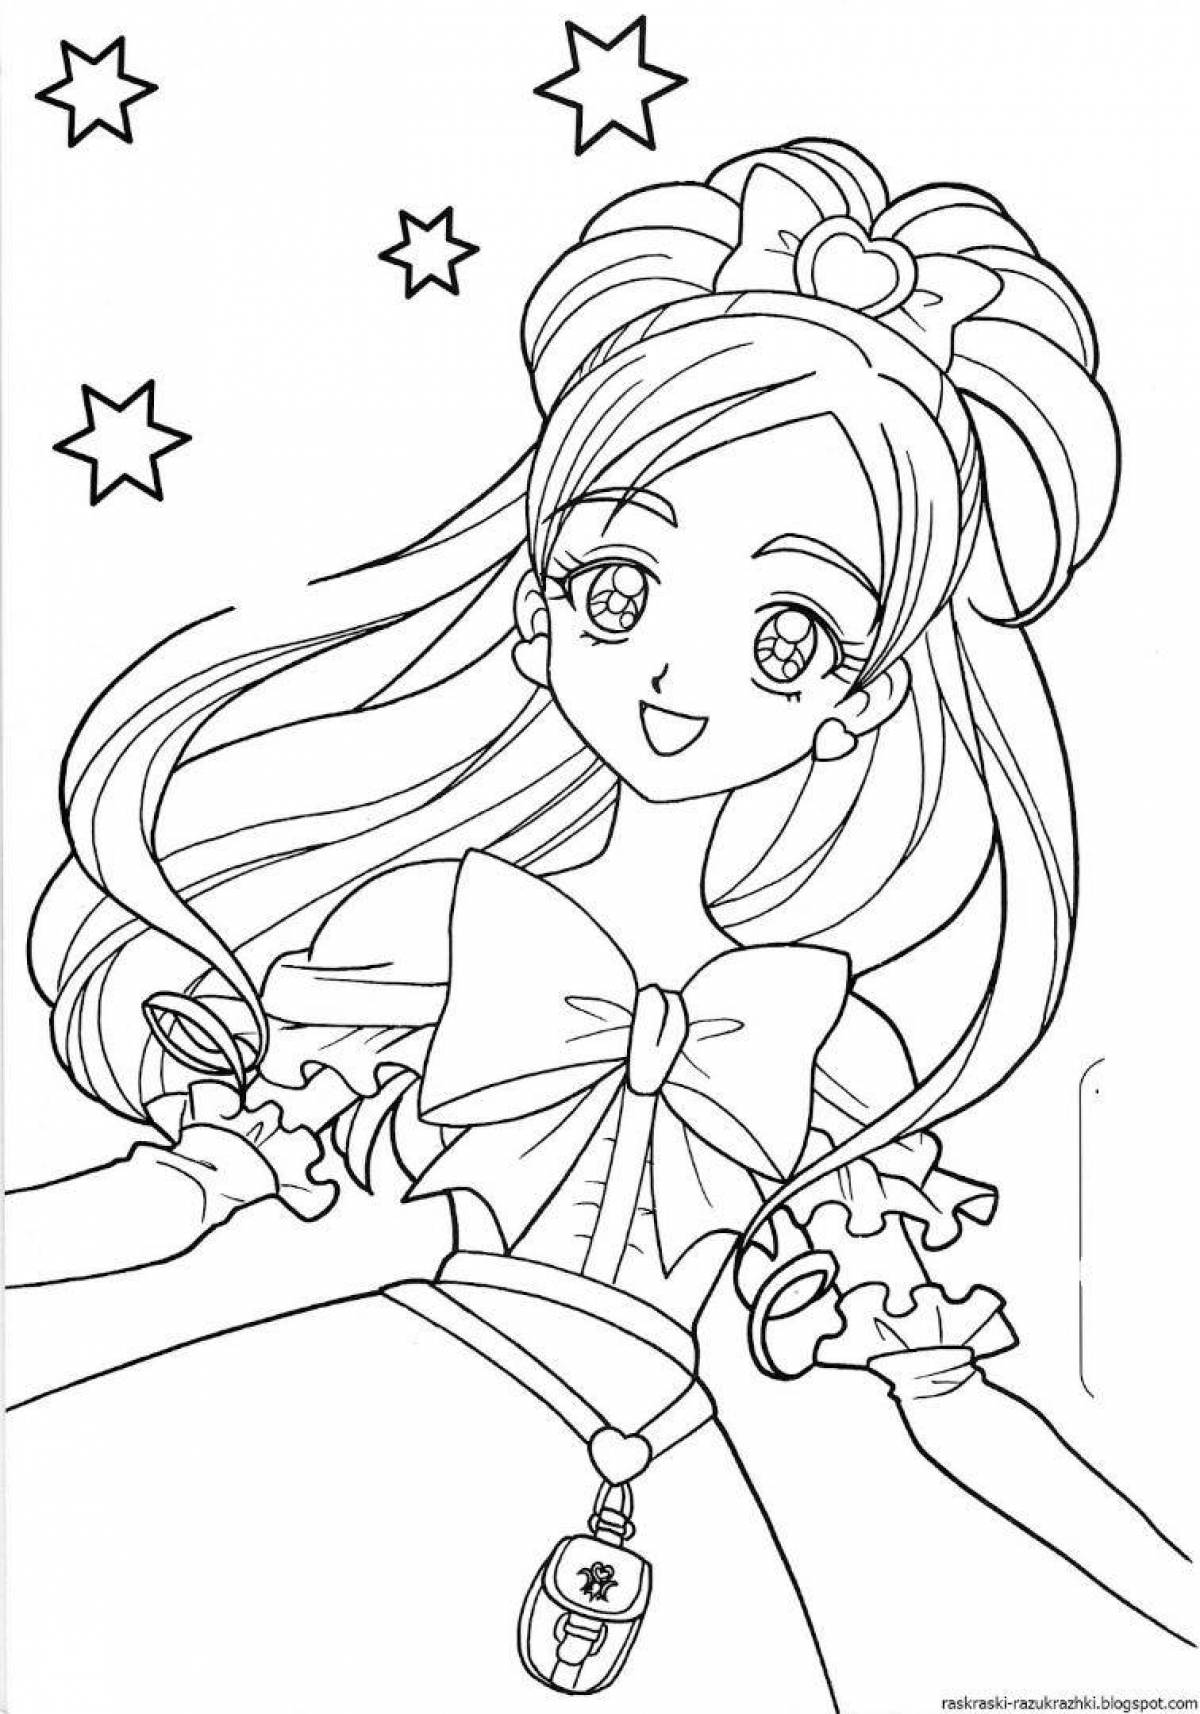 Dreamy anime coloring book for girls